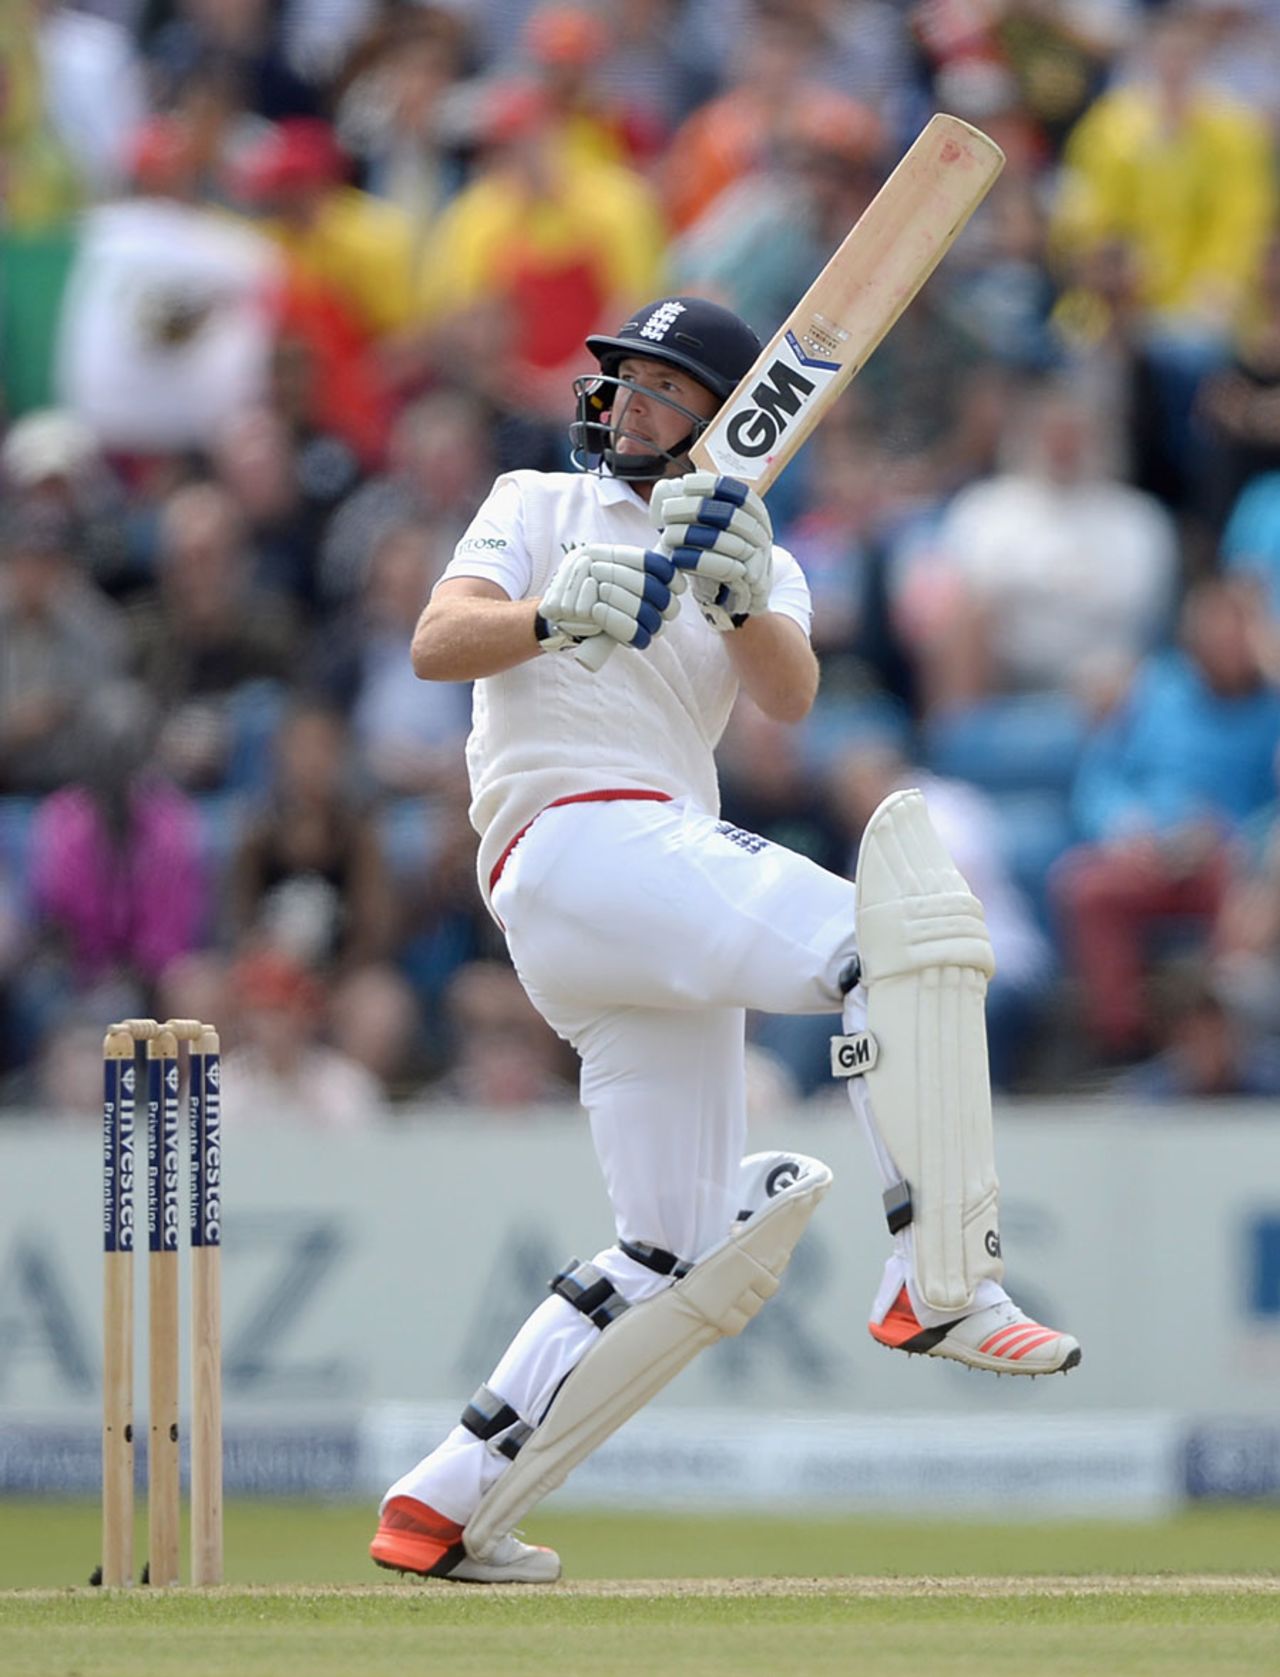 Adam Lyth played very confidently, England v New Zealand, 2nd Investec Test, Headingley, 2nd day, May 30, 2015